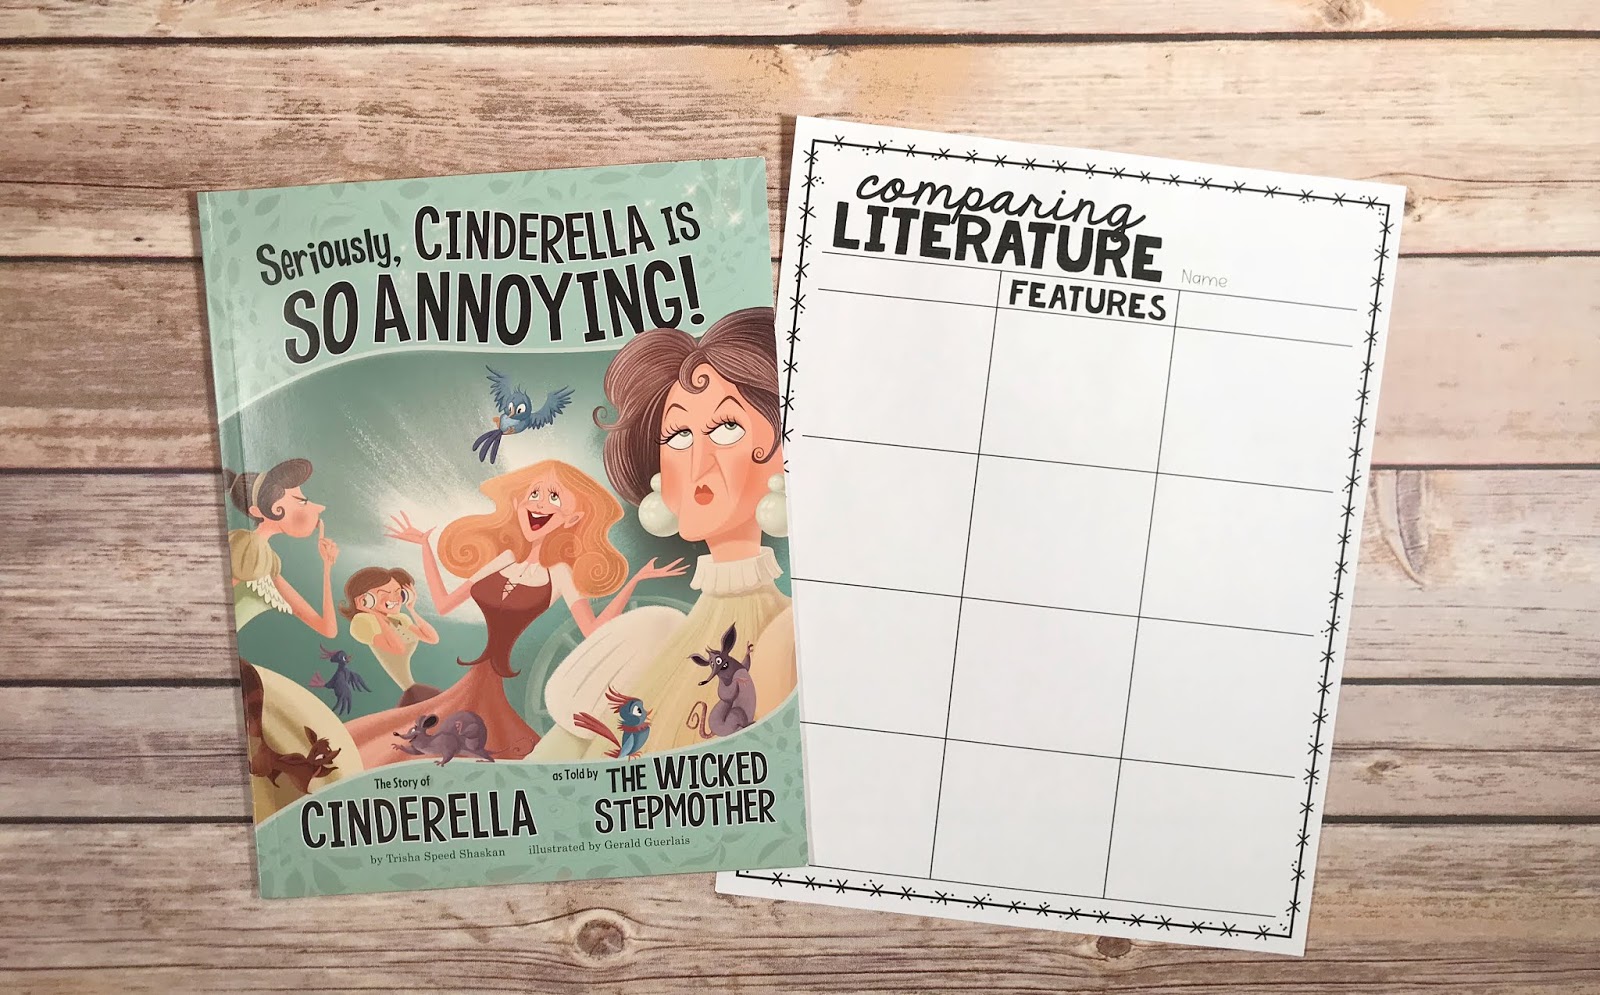 Mentor Text with text "Seriously, Cinderella is So Annoying!" and Graphic Organizer with text "Comparing Literature" 